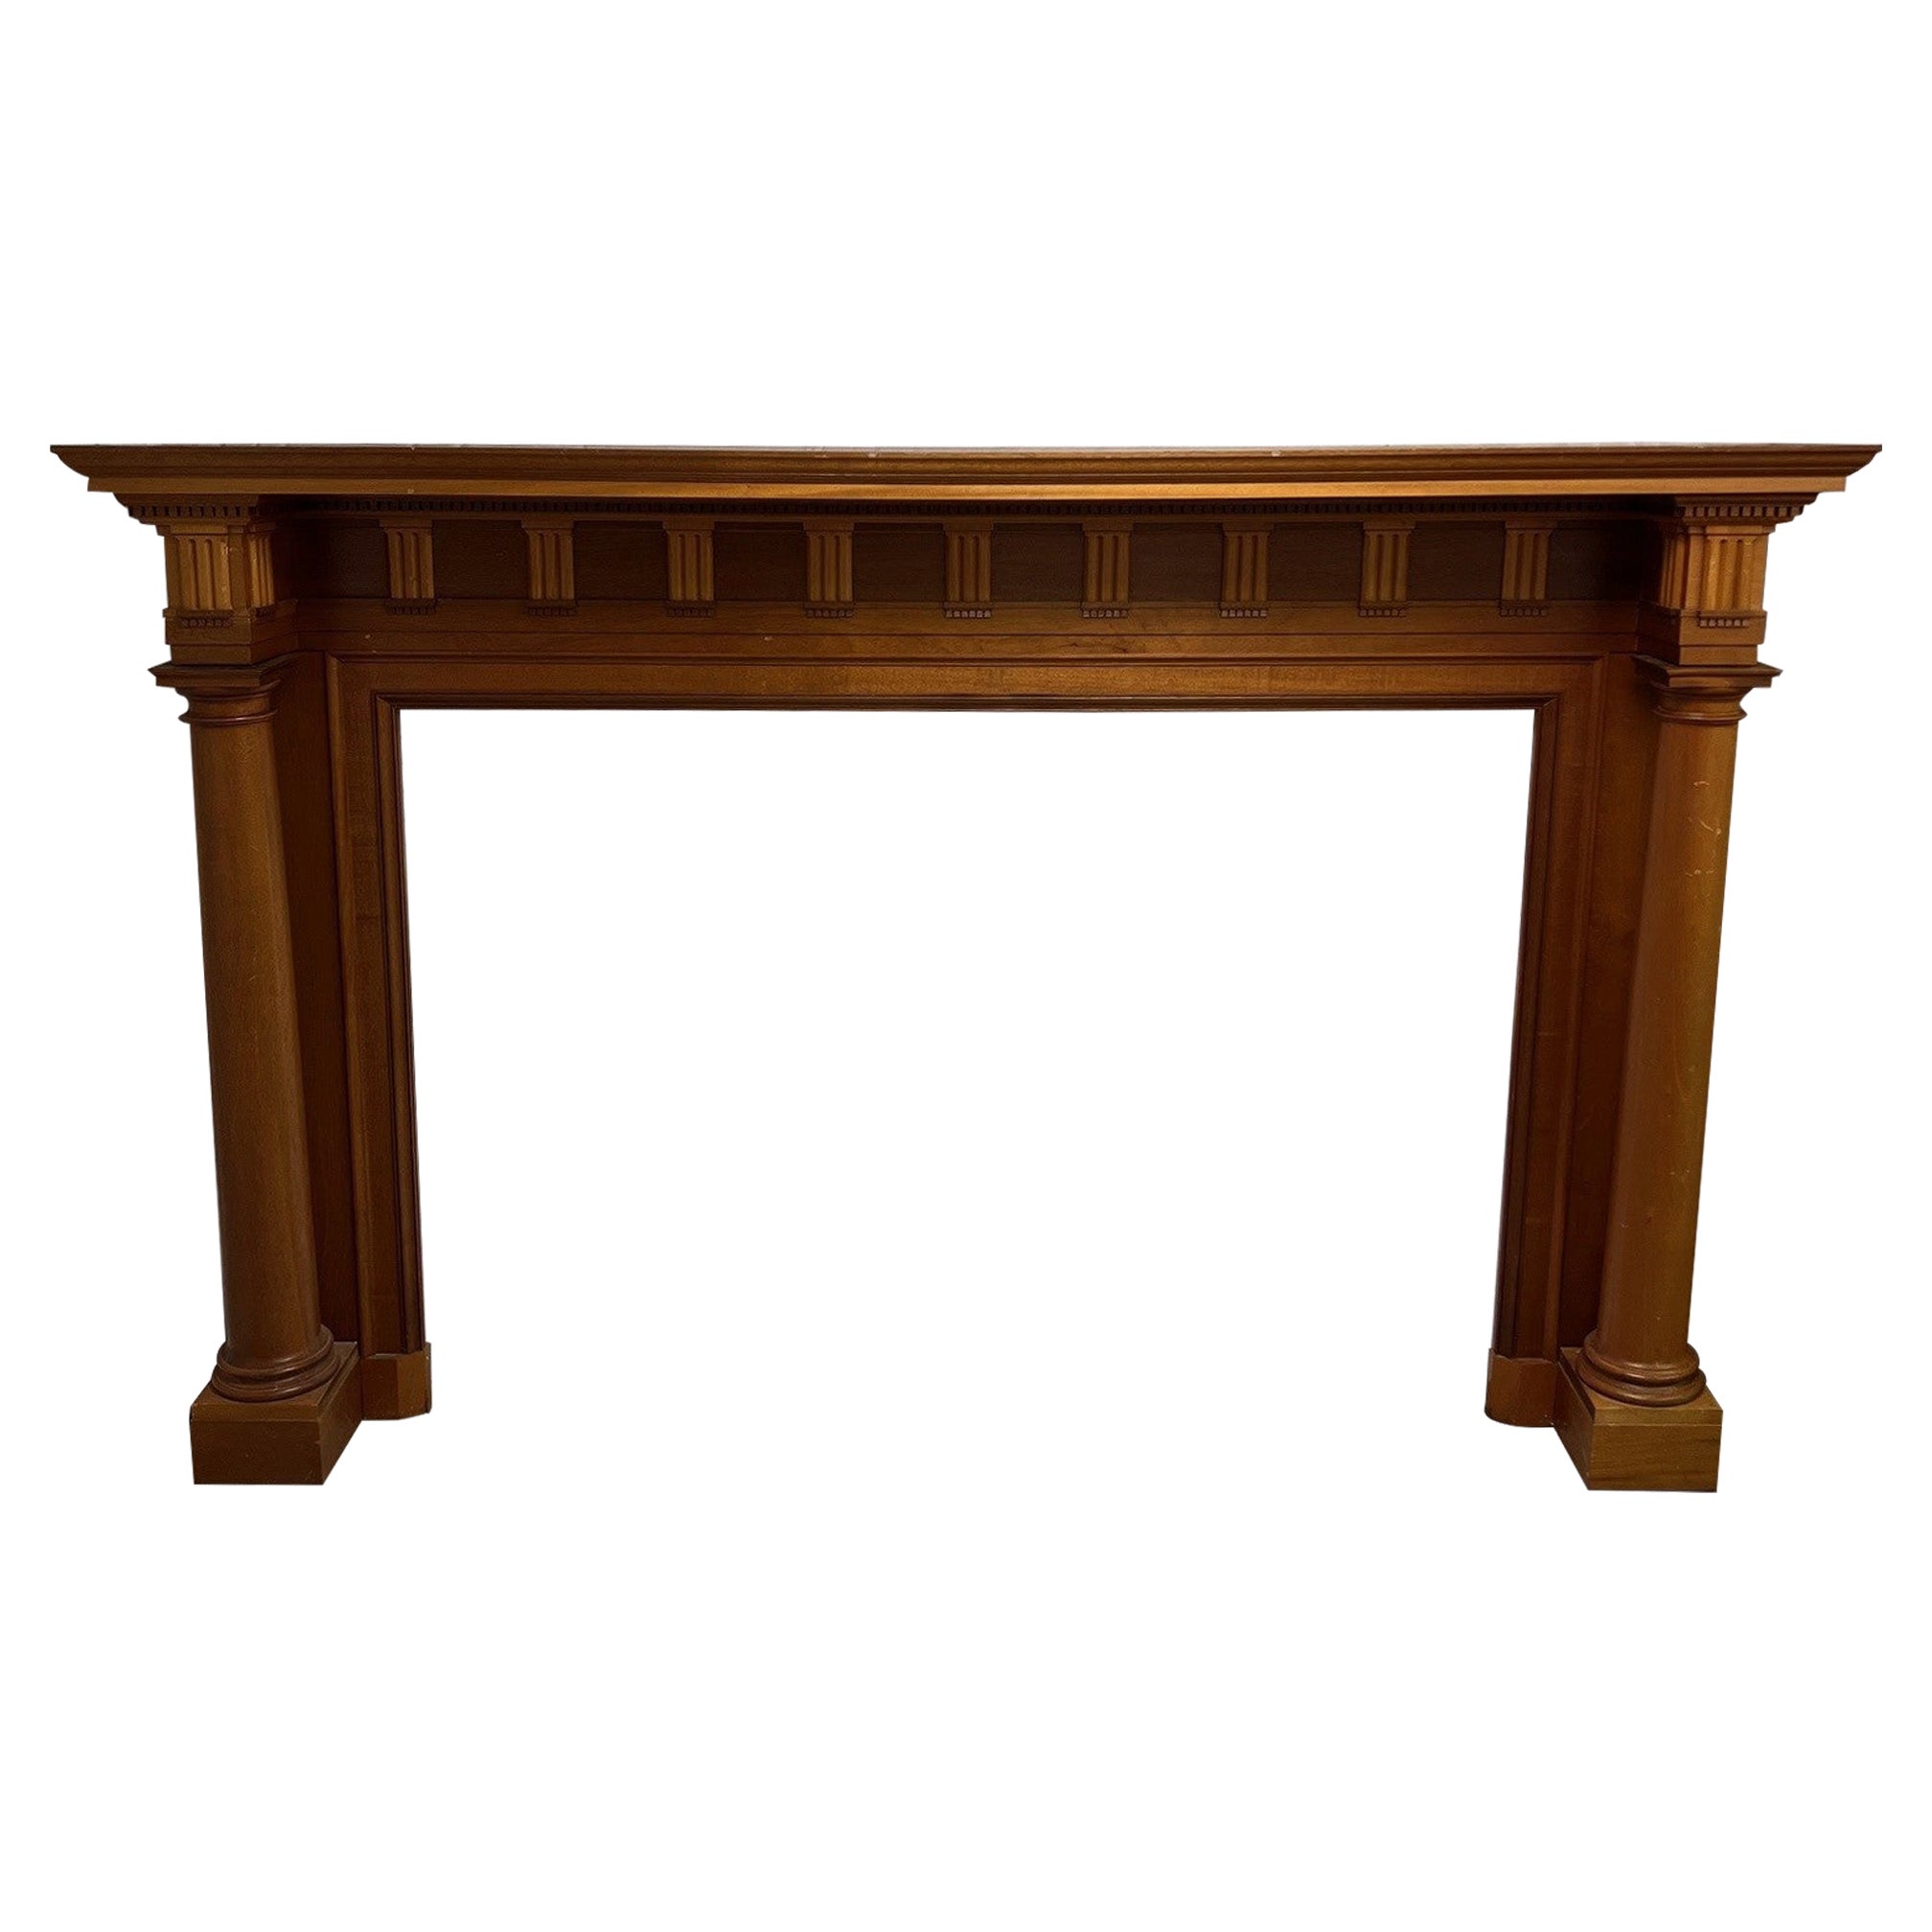 Wood Fireplace Mantel with Columns and Large Opening   For Sale